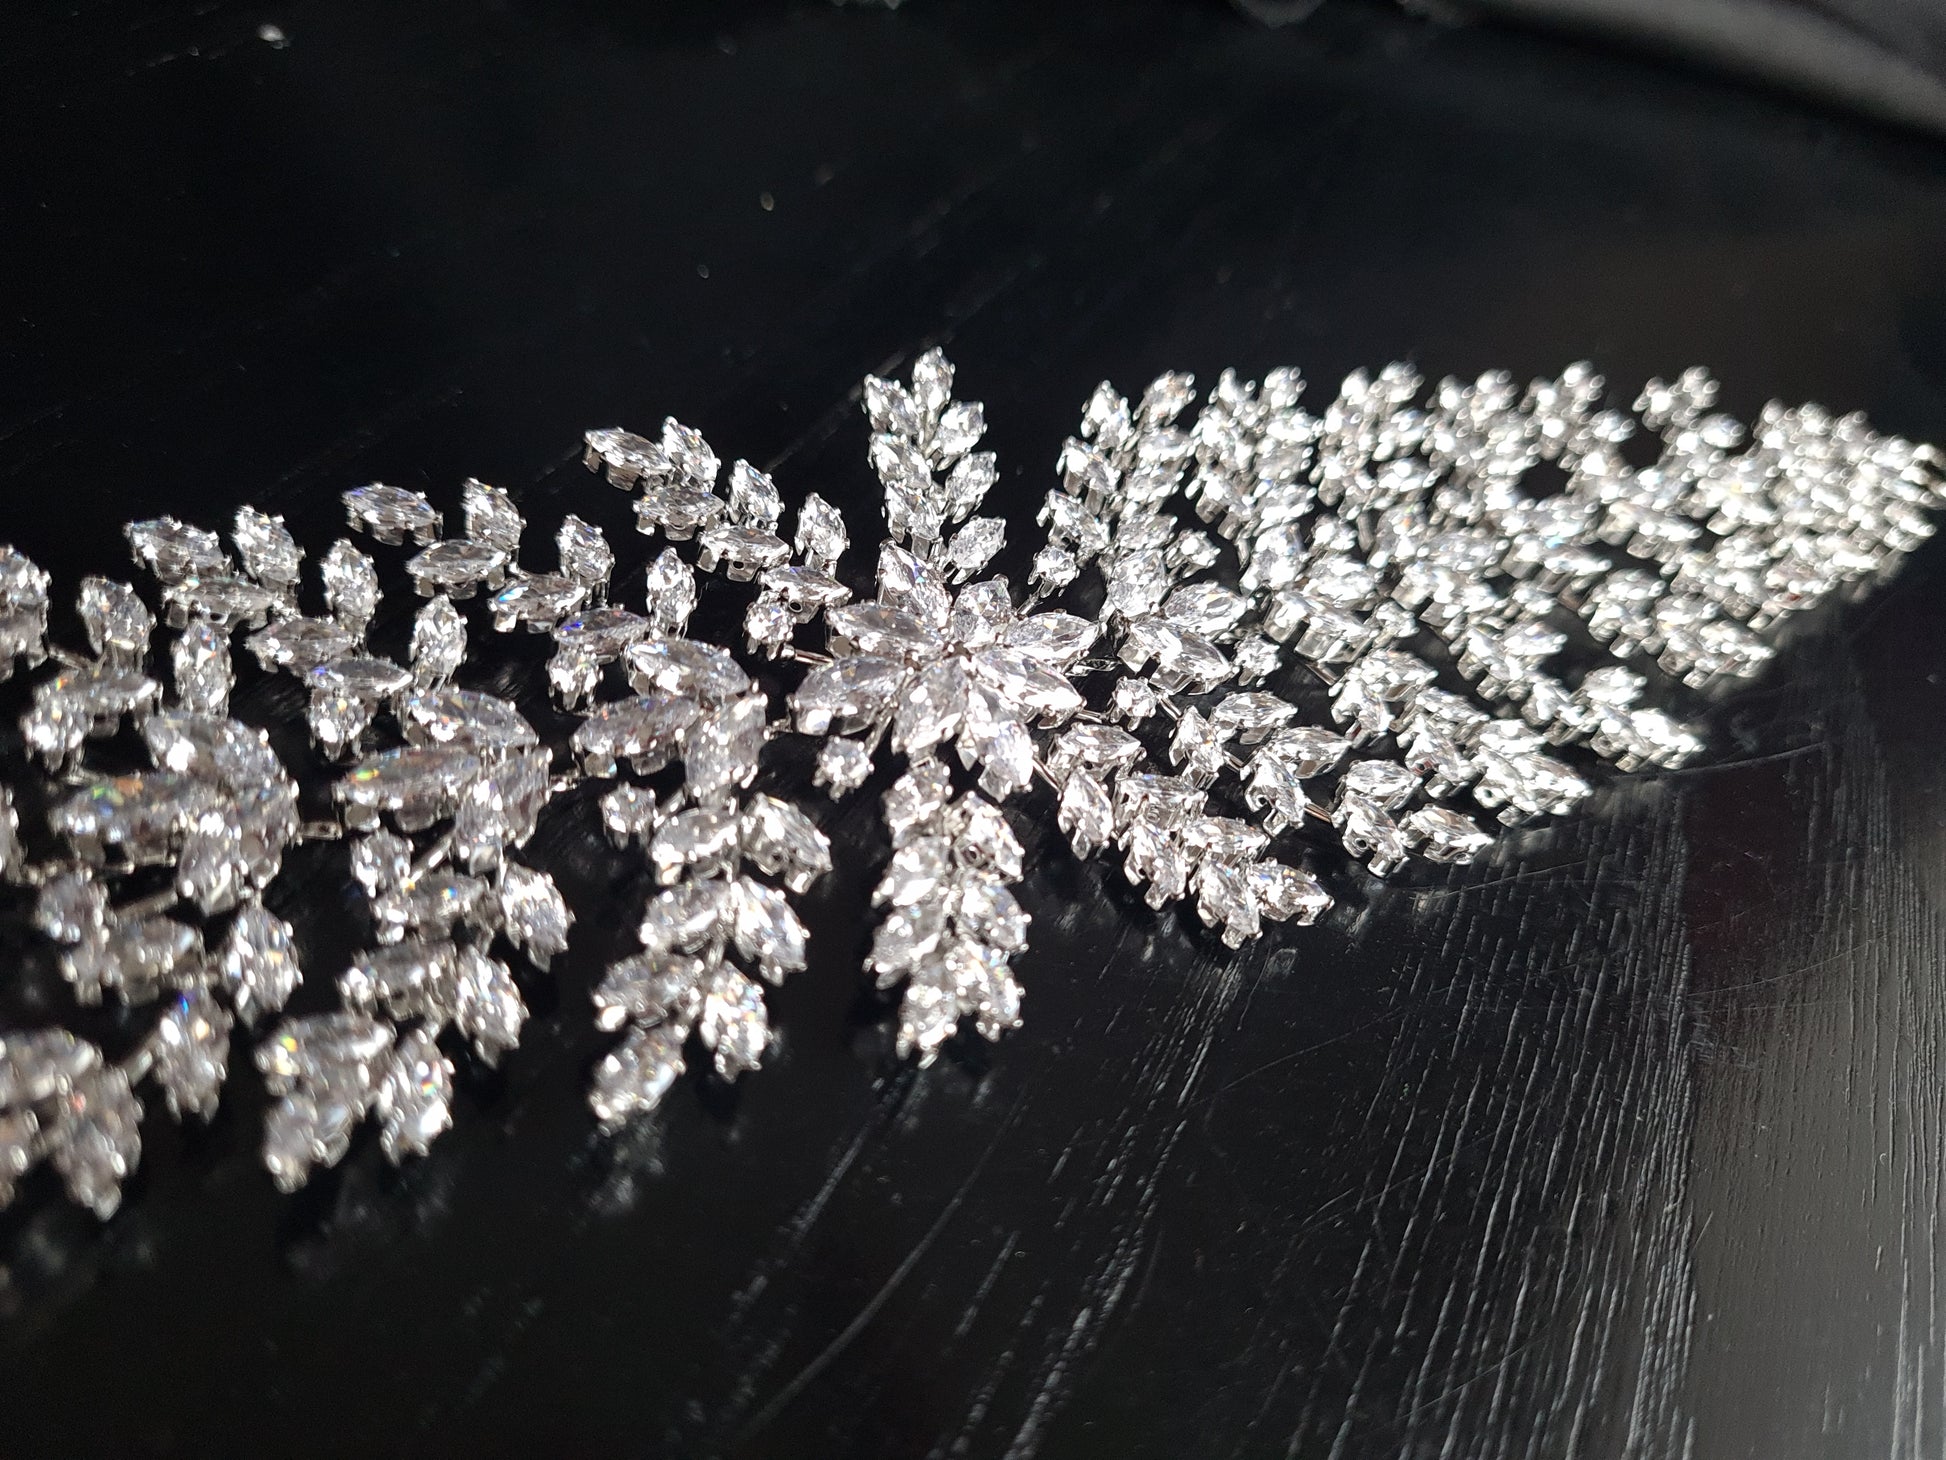 A wedding hair accessory made of metal and diamonds. The tiara has a delicate design with leaves and flowers. The diamonds are clear and sparkling. The background is black.